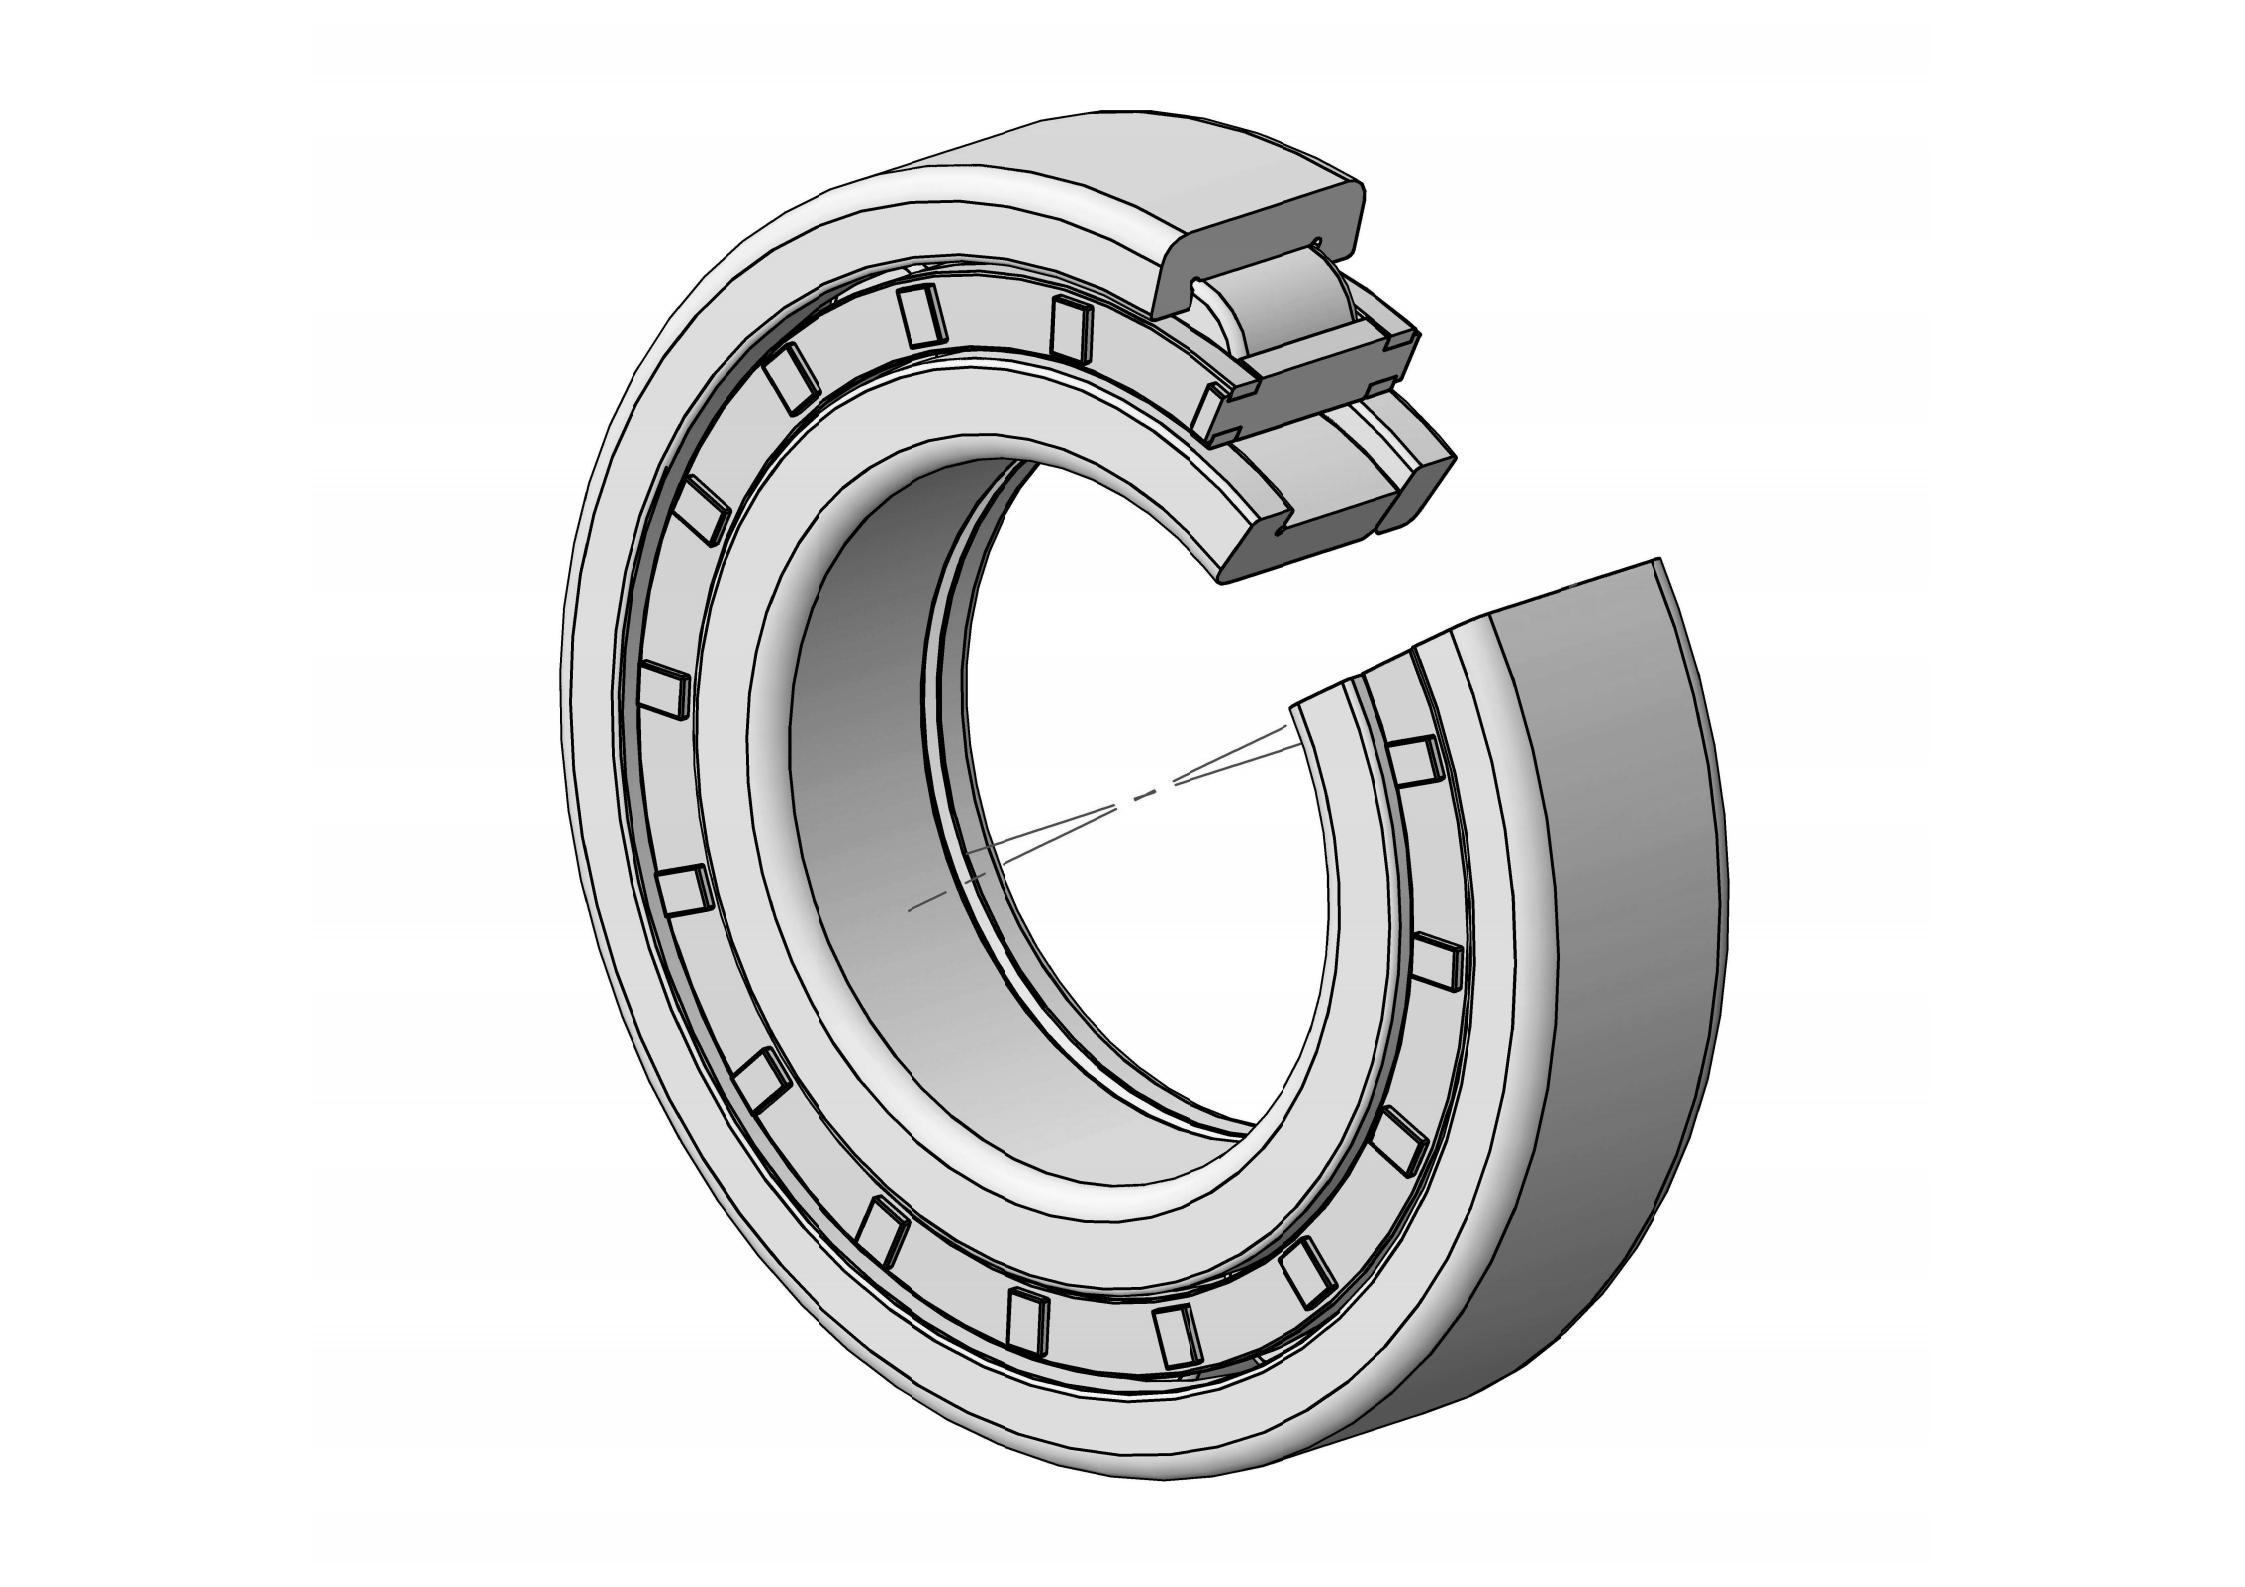 NUP2203-E Single Row Cylindrical roller bearing